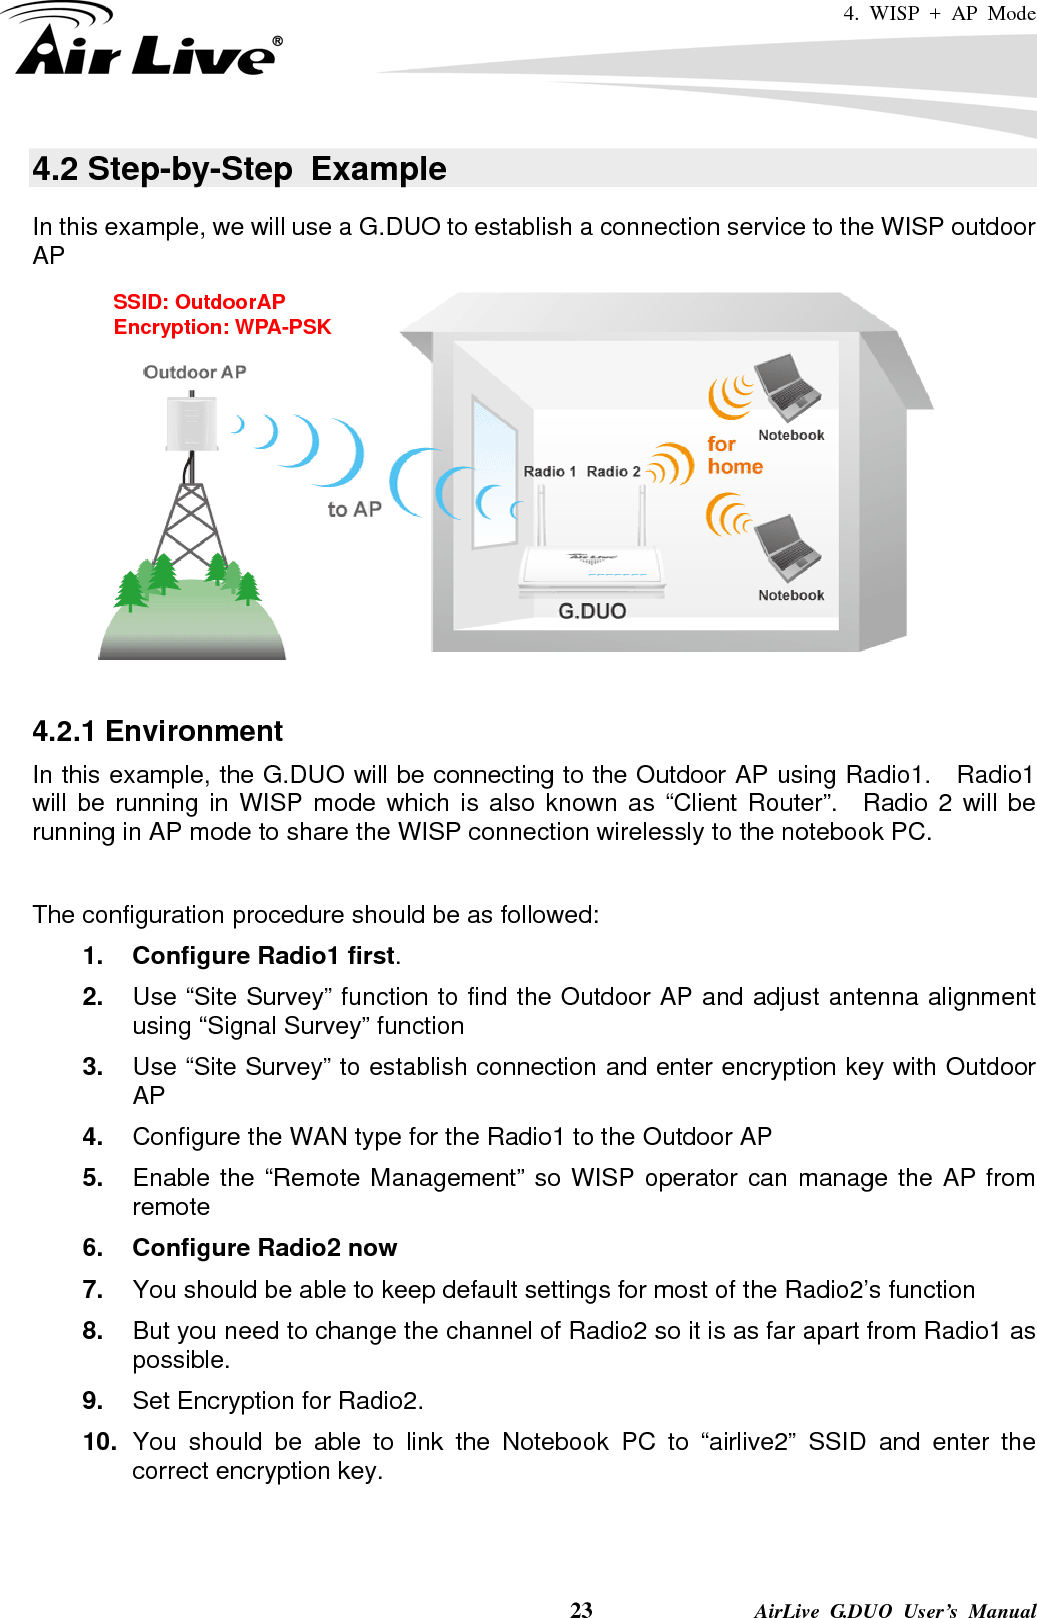 4. WISP + AP Mode    23              AirLive G.DUO User’s Manual 4.2 Step-by-Step  Example In this example, we will use a G.DUO to establish a connection service to the WISP outdoor AP   4.2.1 Environment In this example, the G.DUO will be connecting to the Outdoor AP using Radio1.    Radio1 will be running in WISP mode which is also known as “Client Router”.  Radio 2 will be running in AP mode to share the WISP connection wirelessly to the notebook PC.  The configuration procedure should be as followed: 1.  Configure Radio1 first. 2.  Use “Site Survey” function to find the Outdoor AP and adjust antenna alignment using “Signal Survey” function 3.  Use “Site Survey” to establish connection and enter encryption key with Outdoor AP 4.  Configure the WAN type for the Radio1 to the Outdoor AP 5.  Enable the “Remote Management” so WISP operator can manage the AP from remote 6.  Configure Radio2 now 7.  You should be able to keep default settings for most of the Radio2’s function 8.  But you need to change the channel of Radio2 so it is as far apart from Radio1 as possible. 9.  Set Encryption for Radio2. 10.  You should be able to link the Notebook PC to “airlive2” SSID and enter the correct encryption key.   SSID: OutdoorAP Encryption: WPA-PSK 